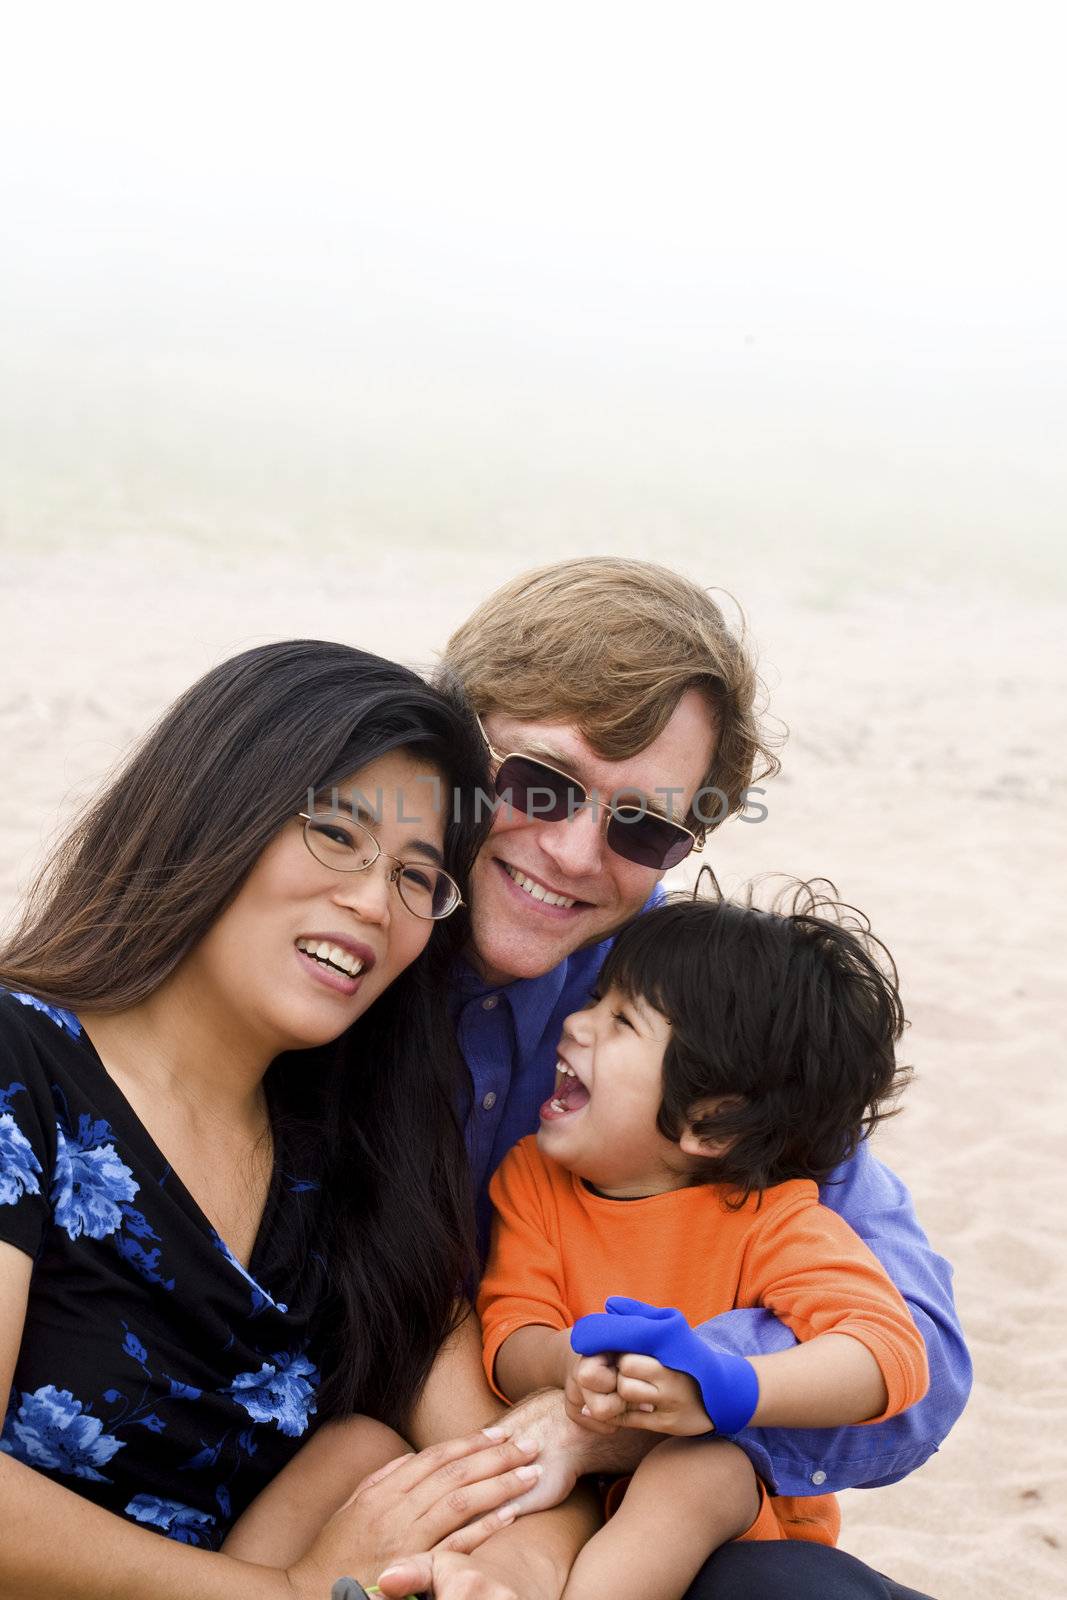 Mutiracial family sitting on beach on misty, foggy day.